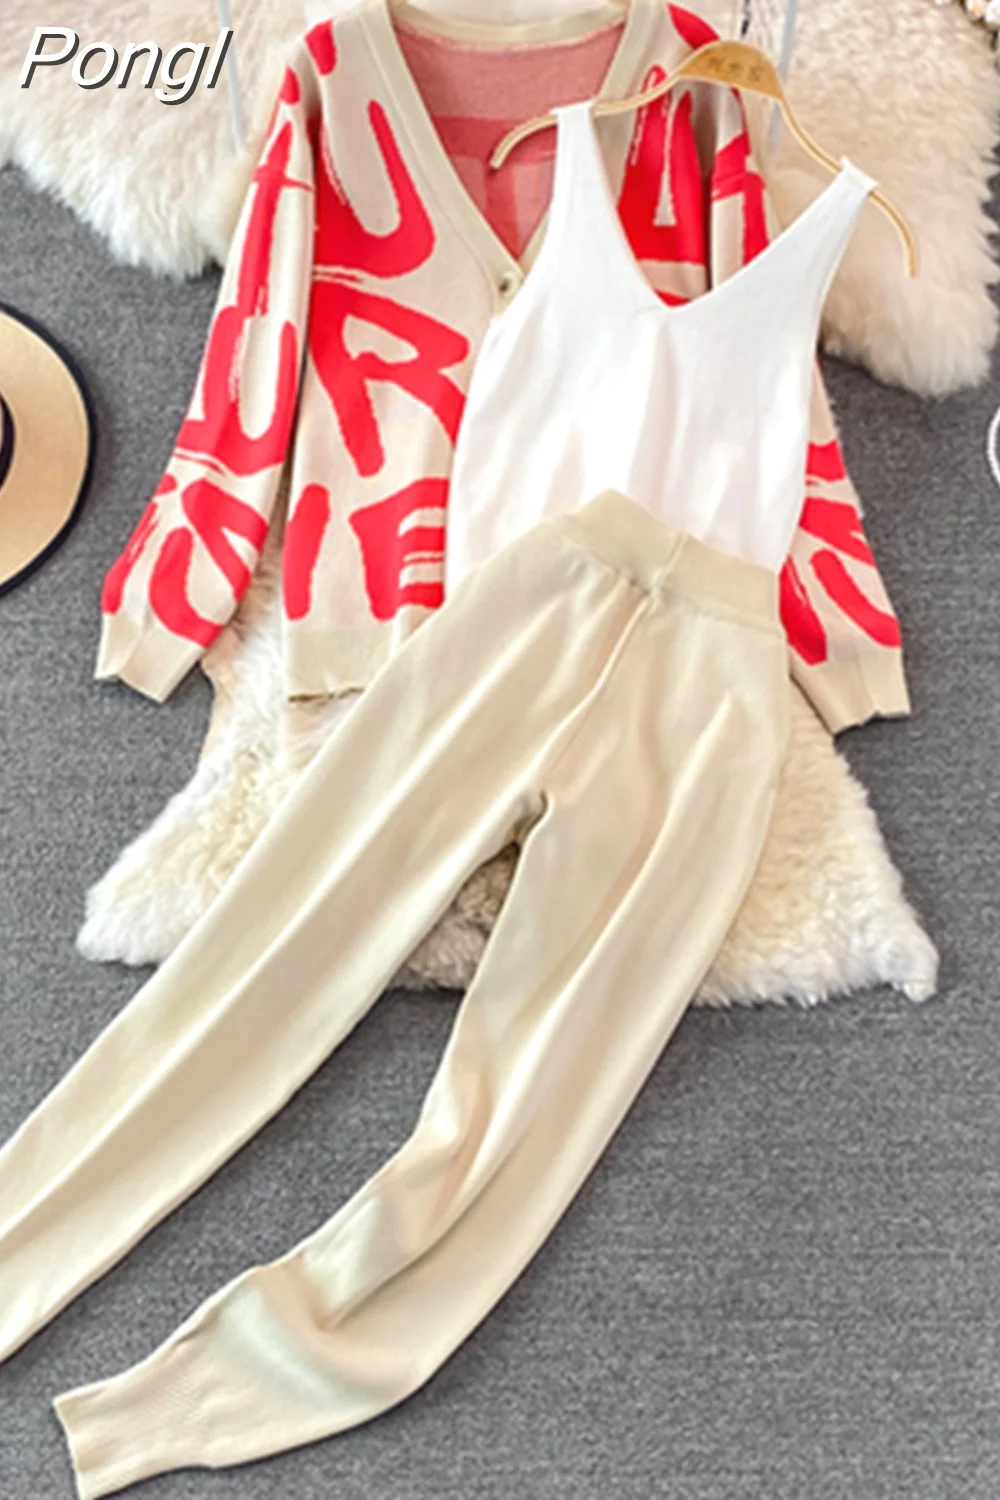 Pongl Letter Tracksuit Women 2023 Fall Winter 3 Piece Knitted Sweater Set Trouser Suits Knitted Cardigan+Vest + Pants Outfits